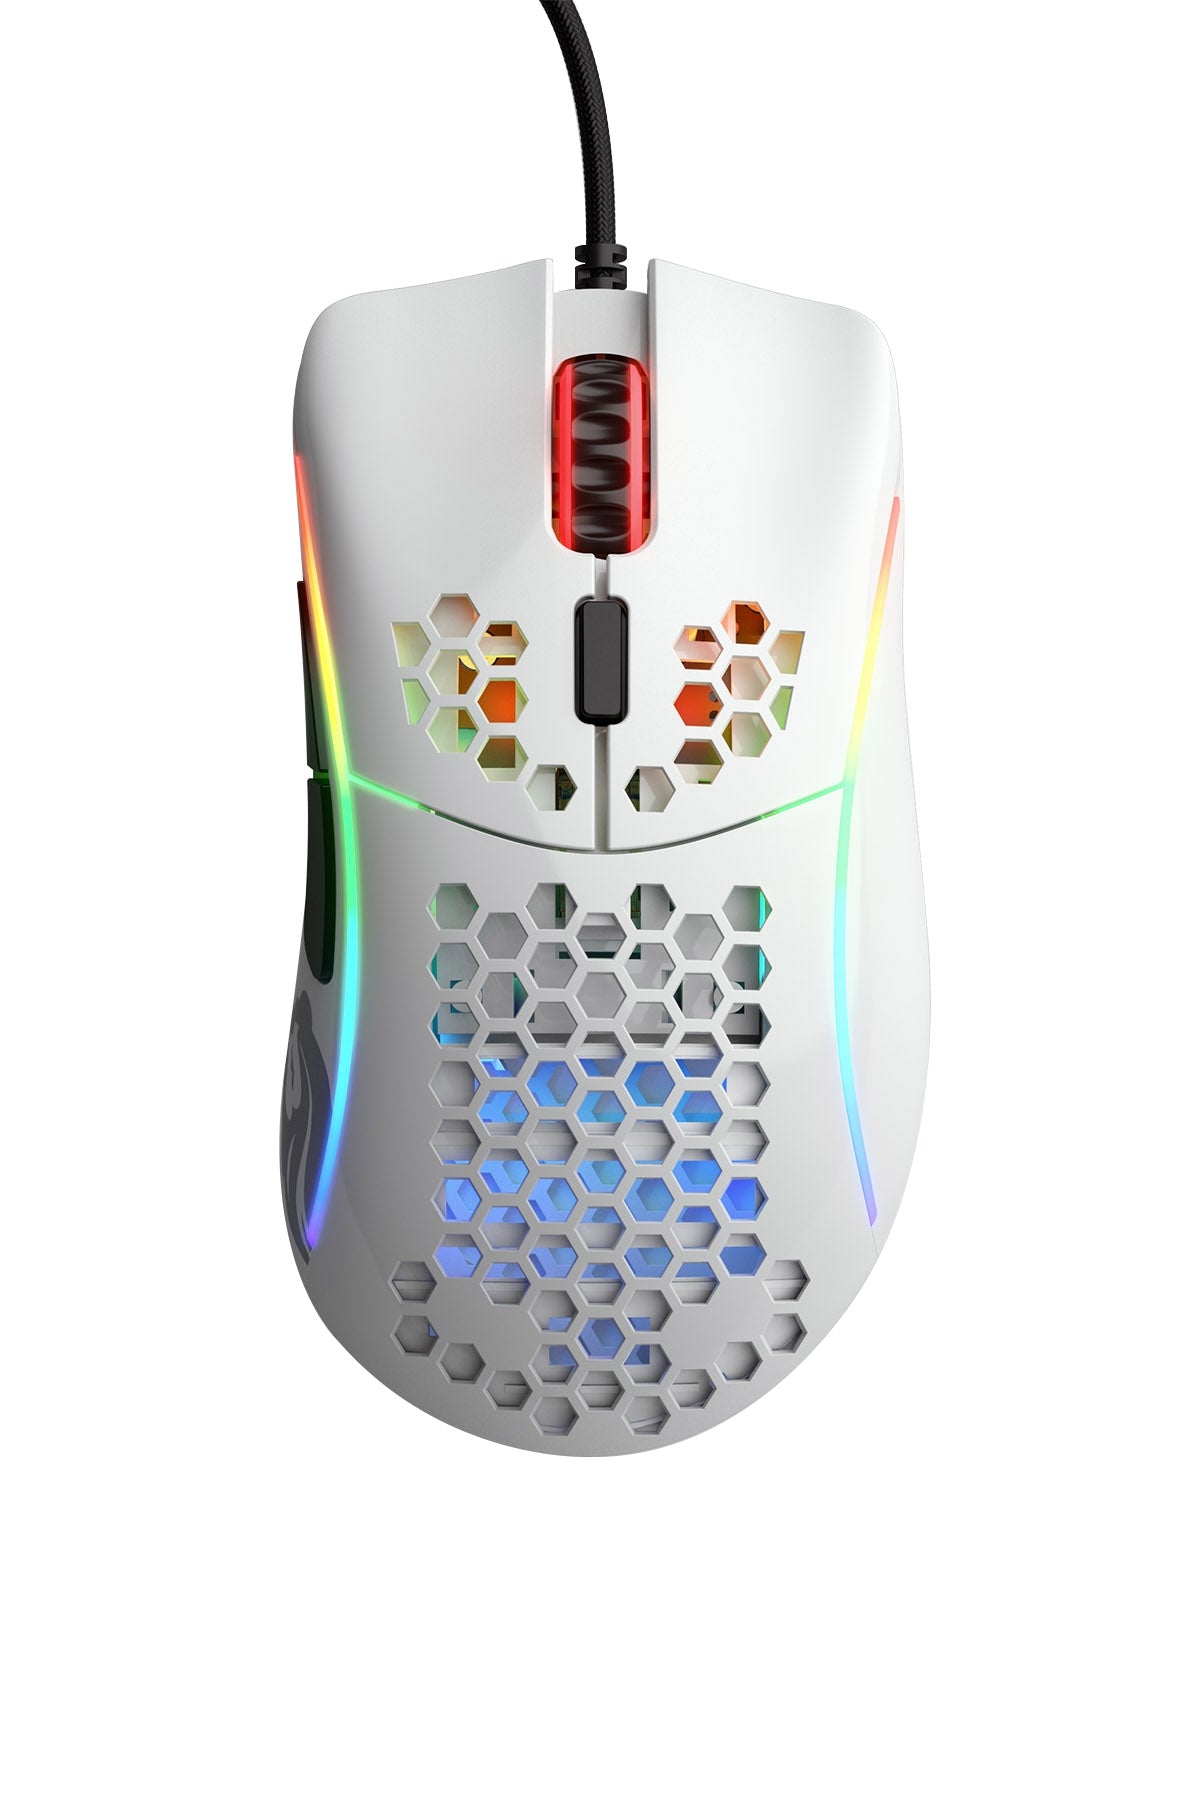 Glorious Model D Minus Glossy White Gaming Mouse